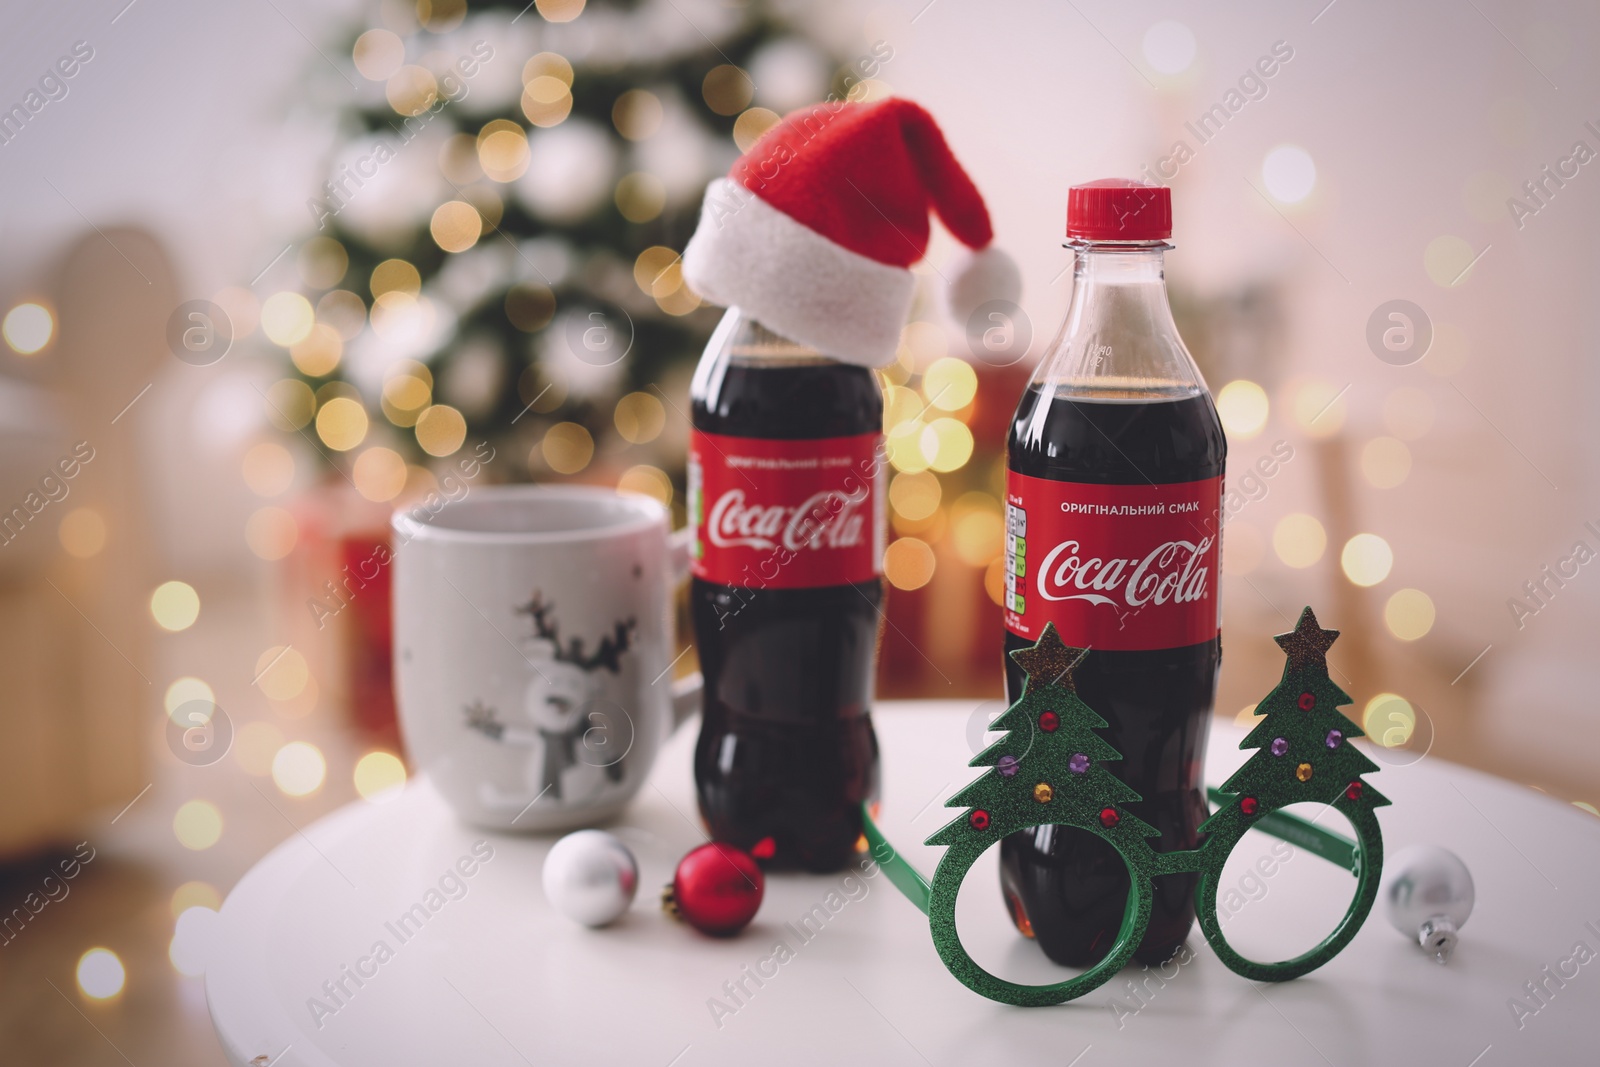 Photo of MYKOLAIV, UKRAINE - January 01, 2021: Bottles of Coca-Cola, cup and party glasses on table against blurred Christmas lights